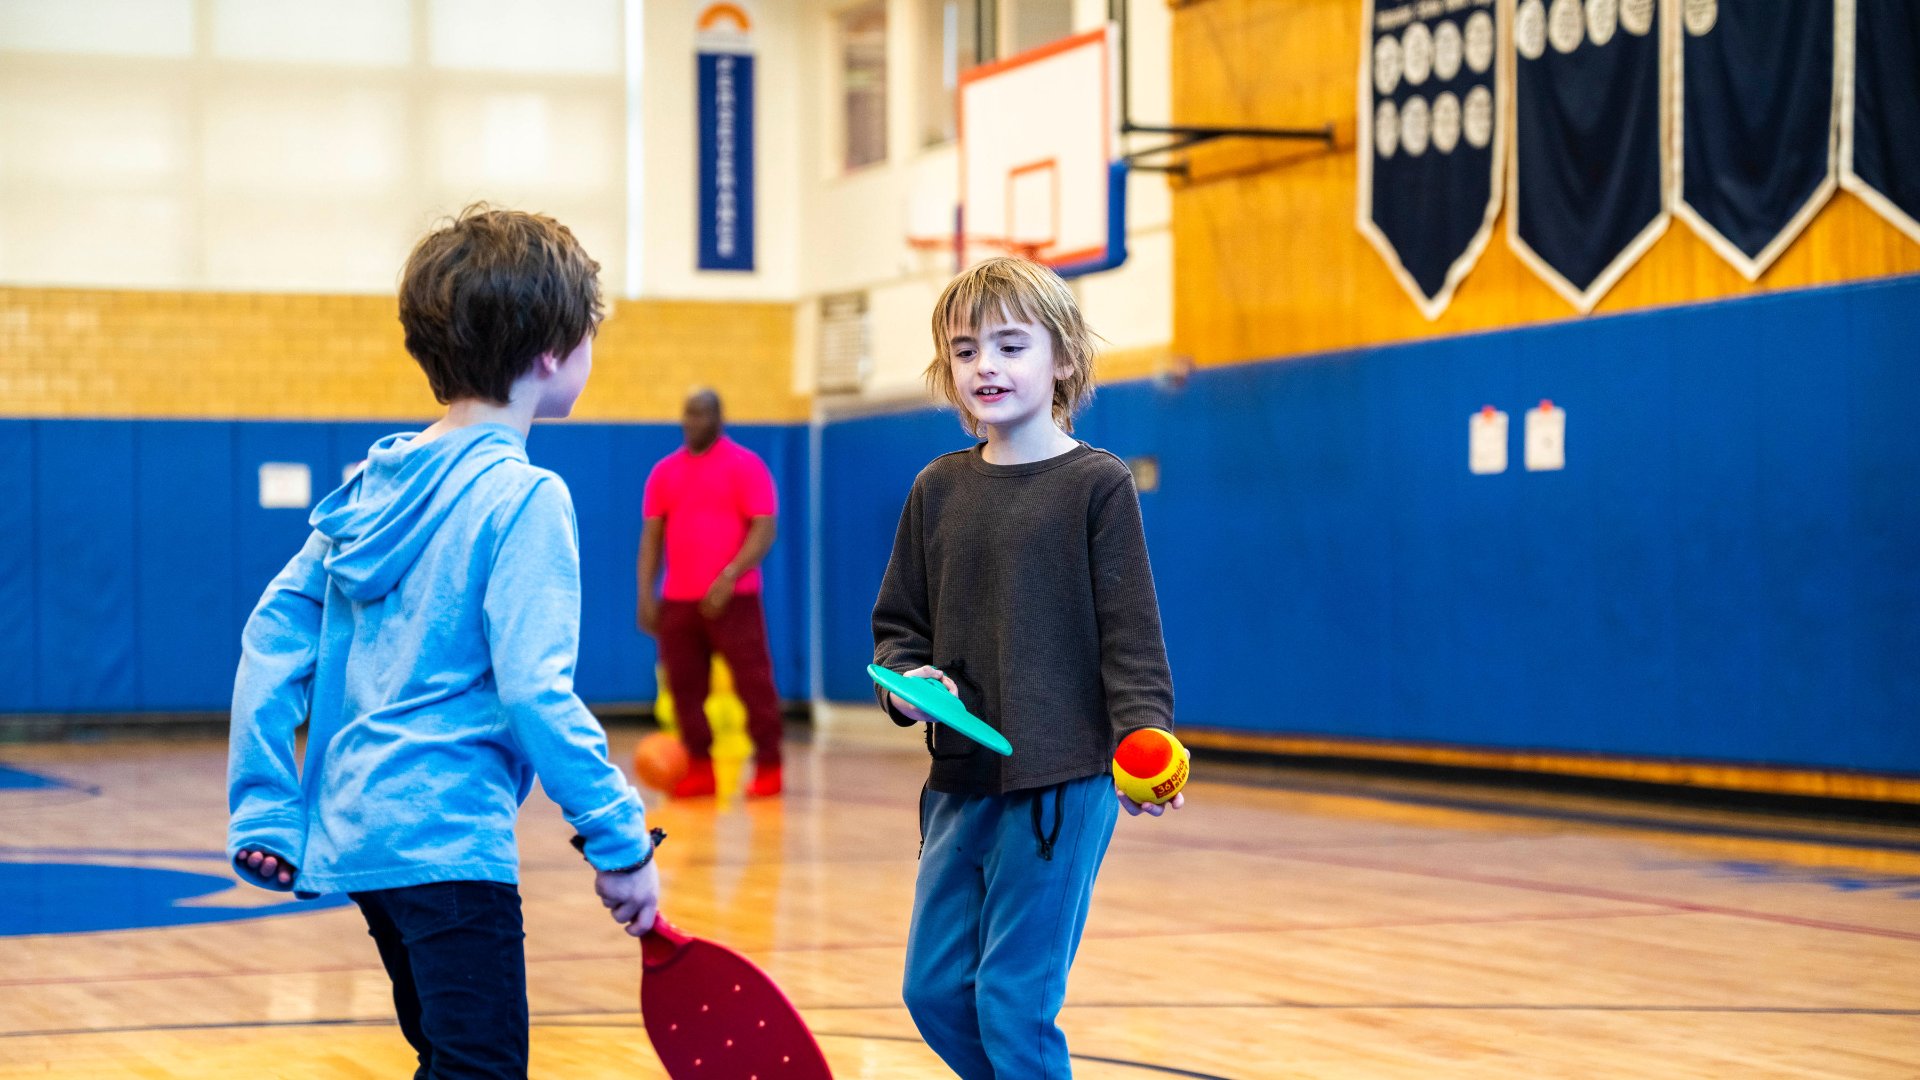 Lower School students doing extra-curricular physical activities at Churchill School.